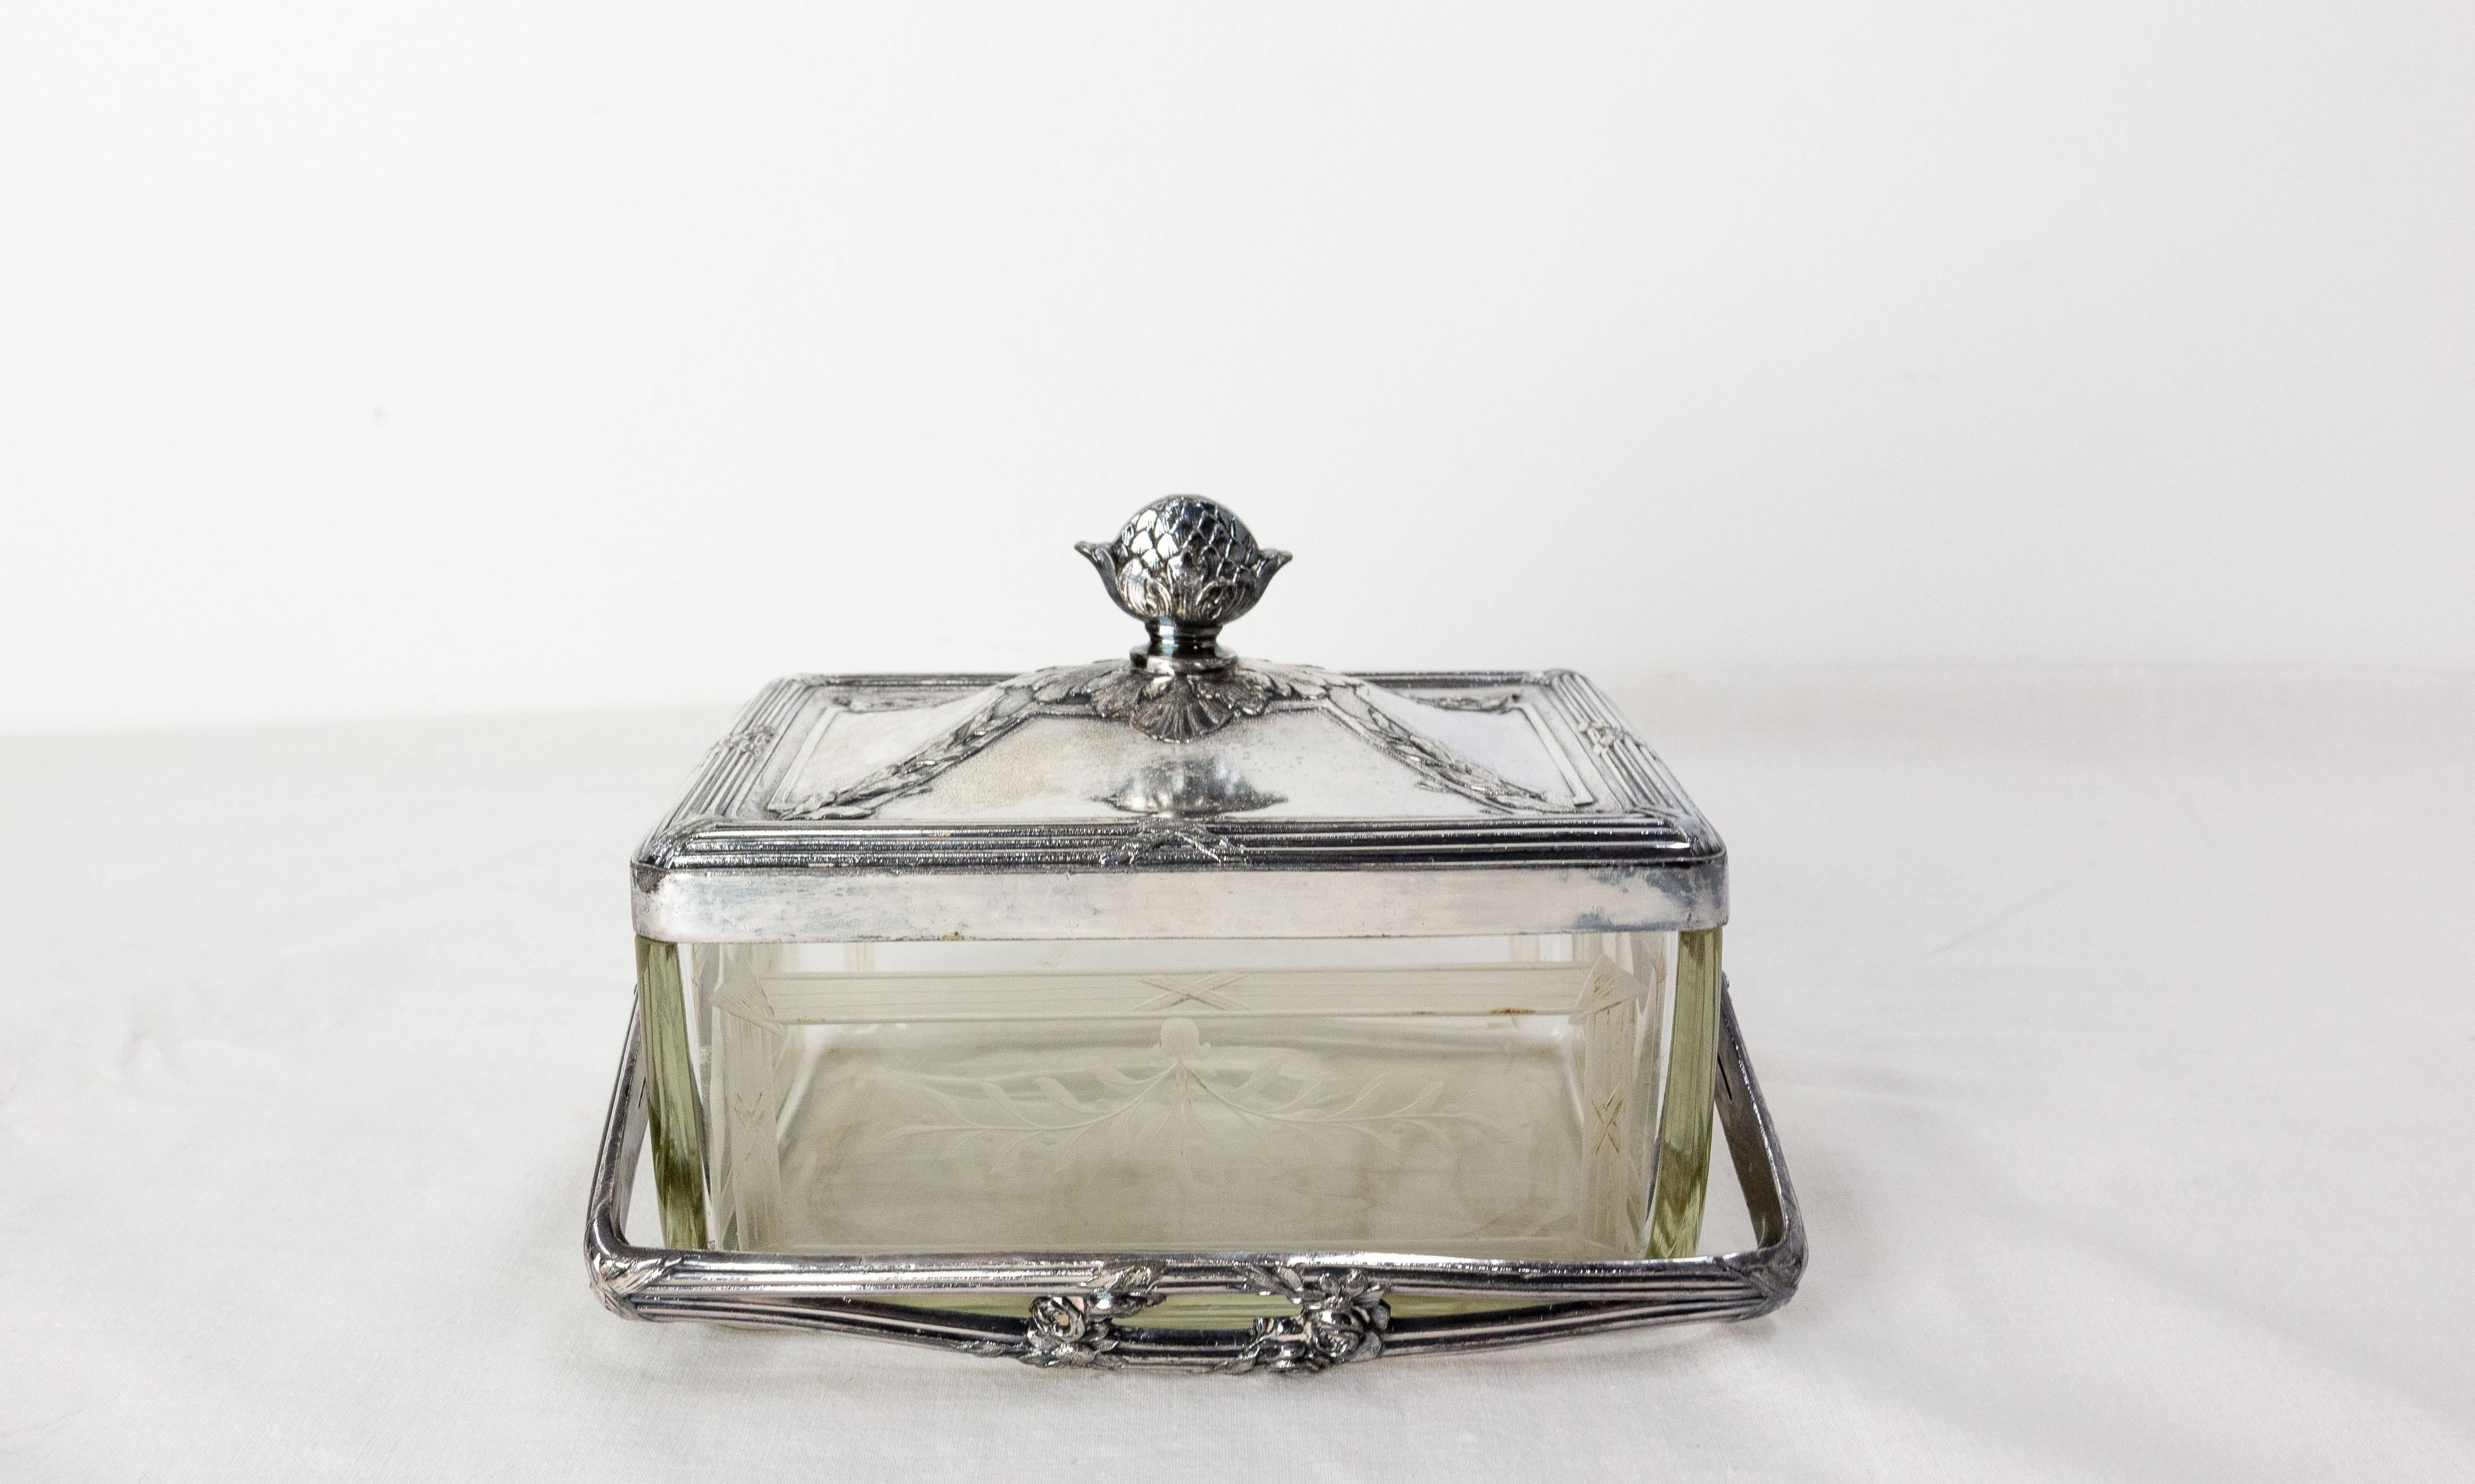 Small engraved glass box framed with nickel-plated spelter with it matching lid and a handle.
The decoration of the box with its vegetable elements, its roses and pine cone are typical of the Napoleon III period.
Can be used as an elegent empty